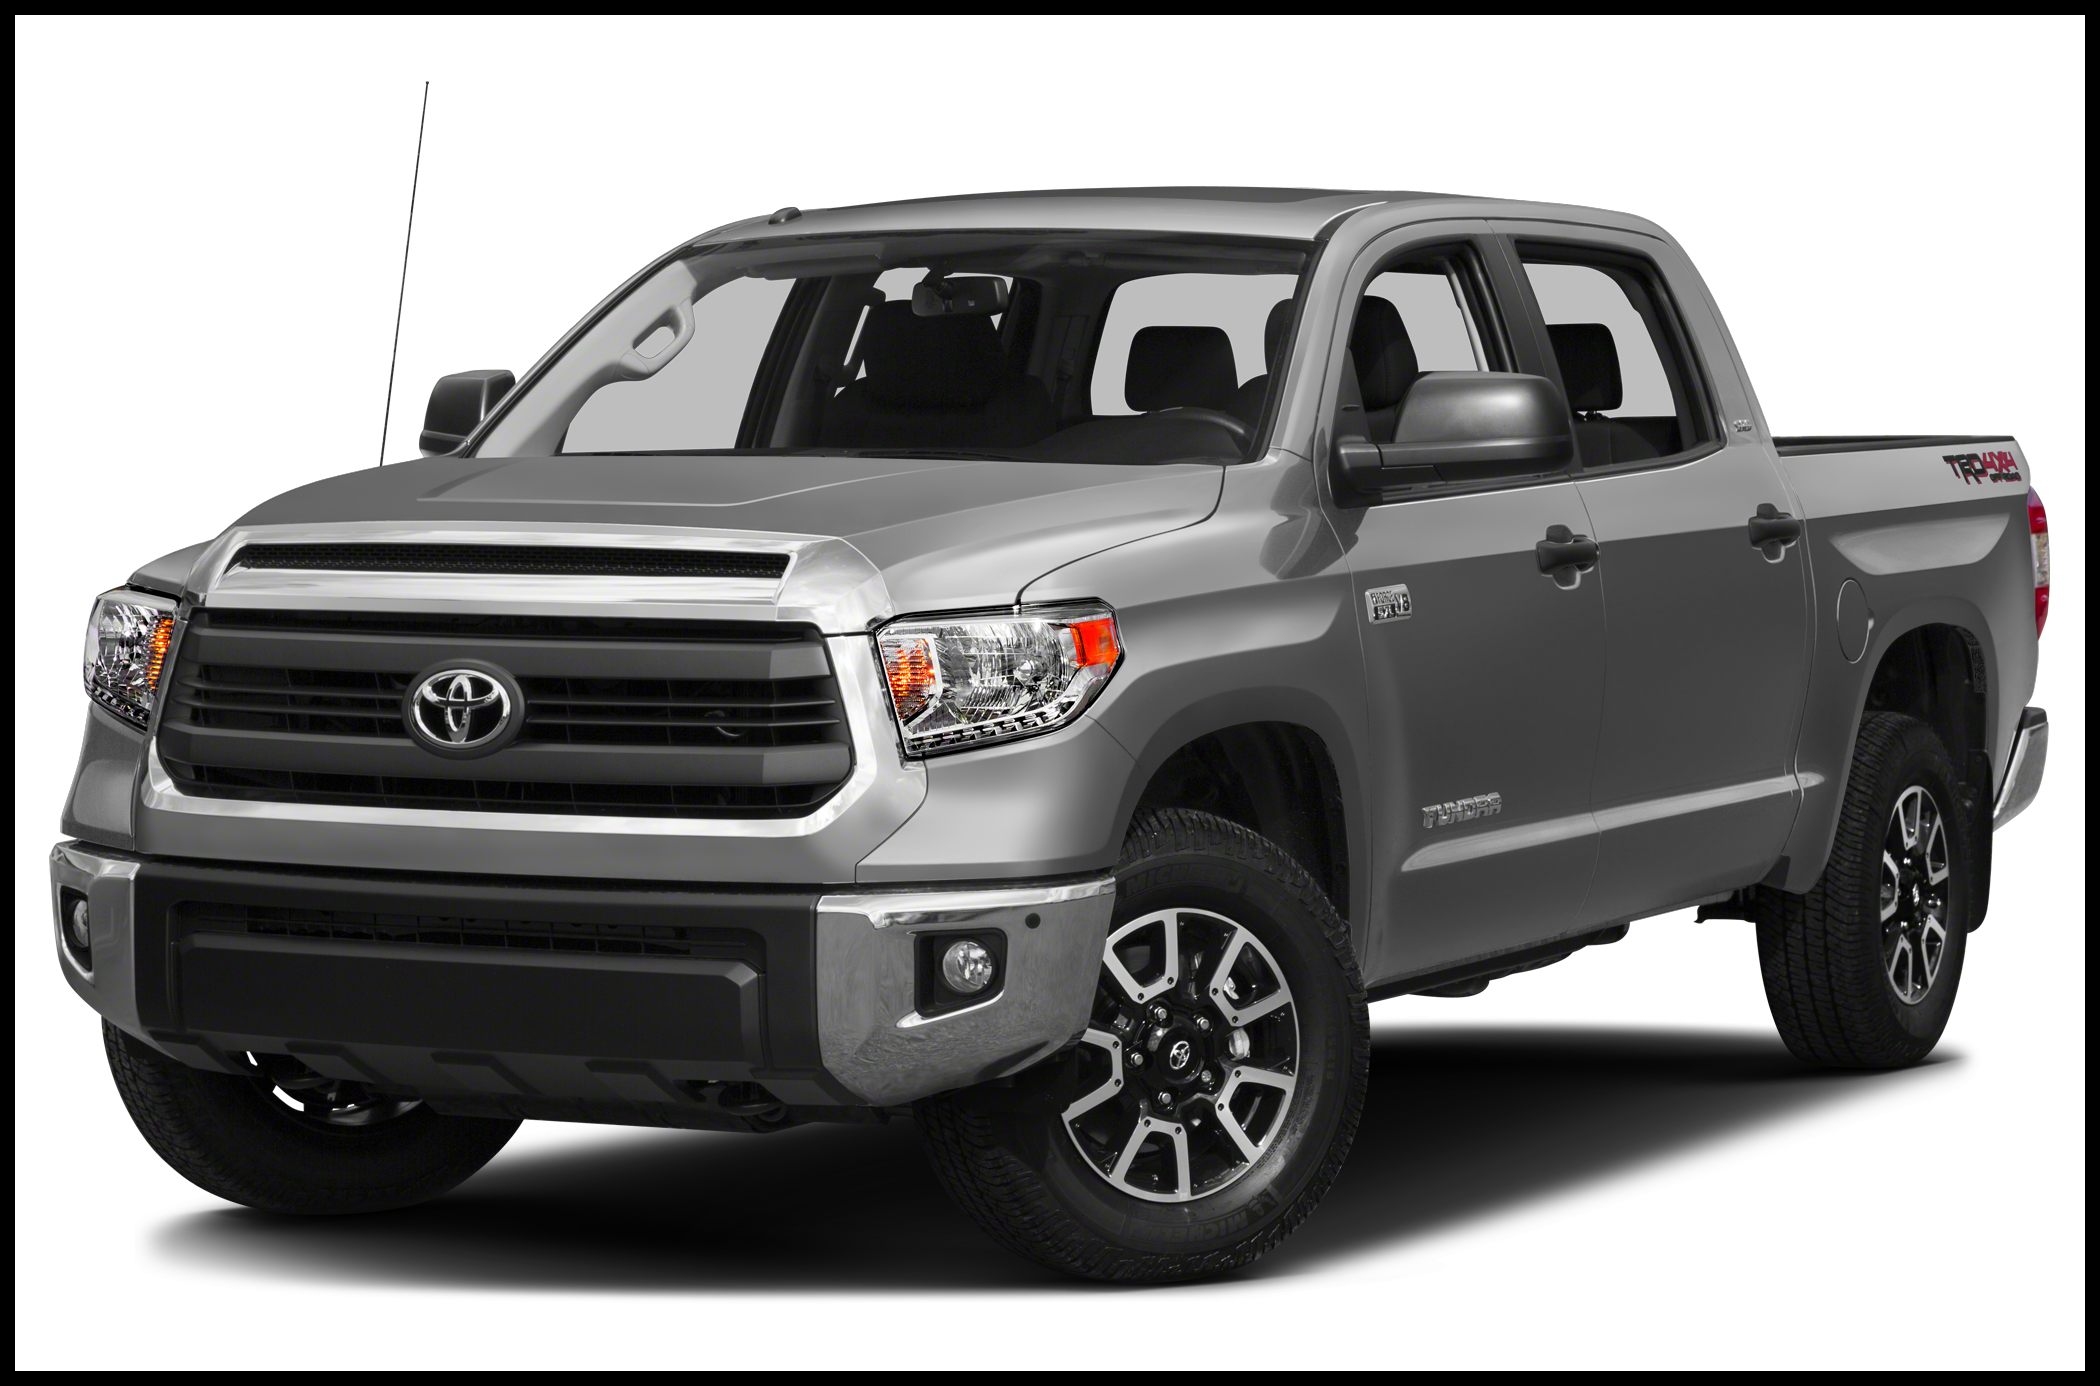 2014 Toyota Tundra SR5 4 6L V8 4x2 Crew Max 5 6 ft box 145 7 in WB Pricing and Options